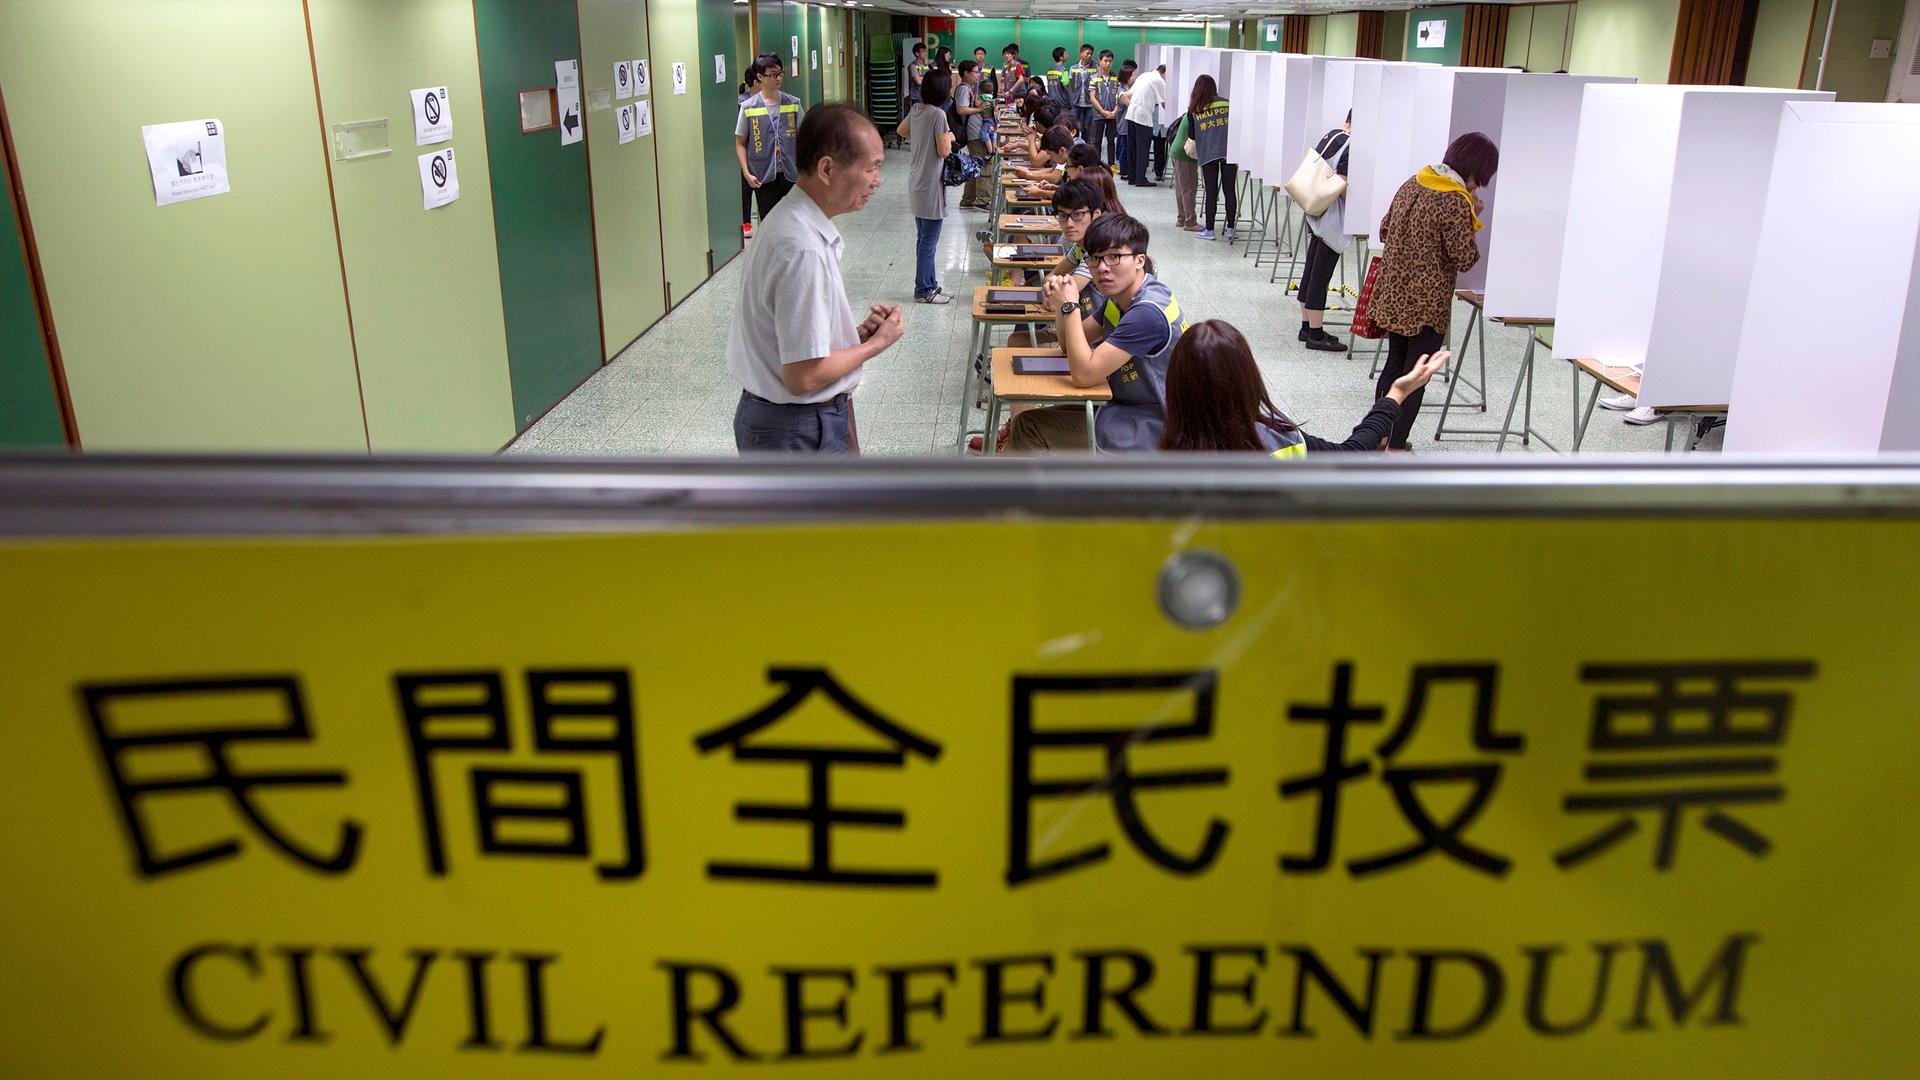 Voters are guided inside a polling station during a civil referendum held by a group in Hong Kong called “Occupy Central with Love and Peace.” The unofficial referendum sparked warnings from China's Communist Party leaders. 